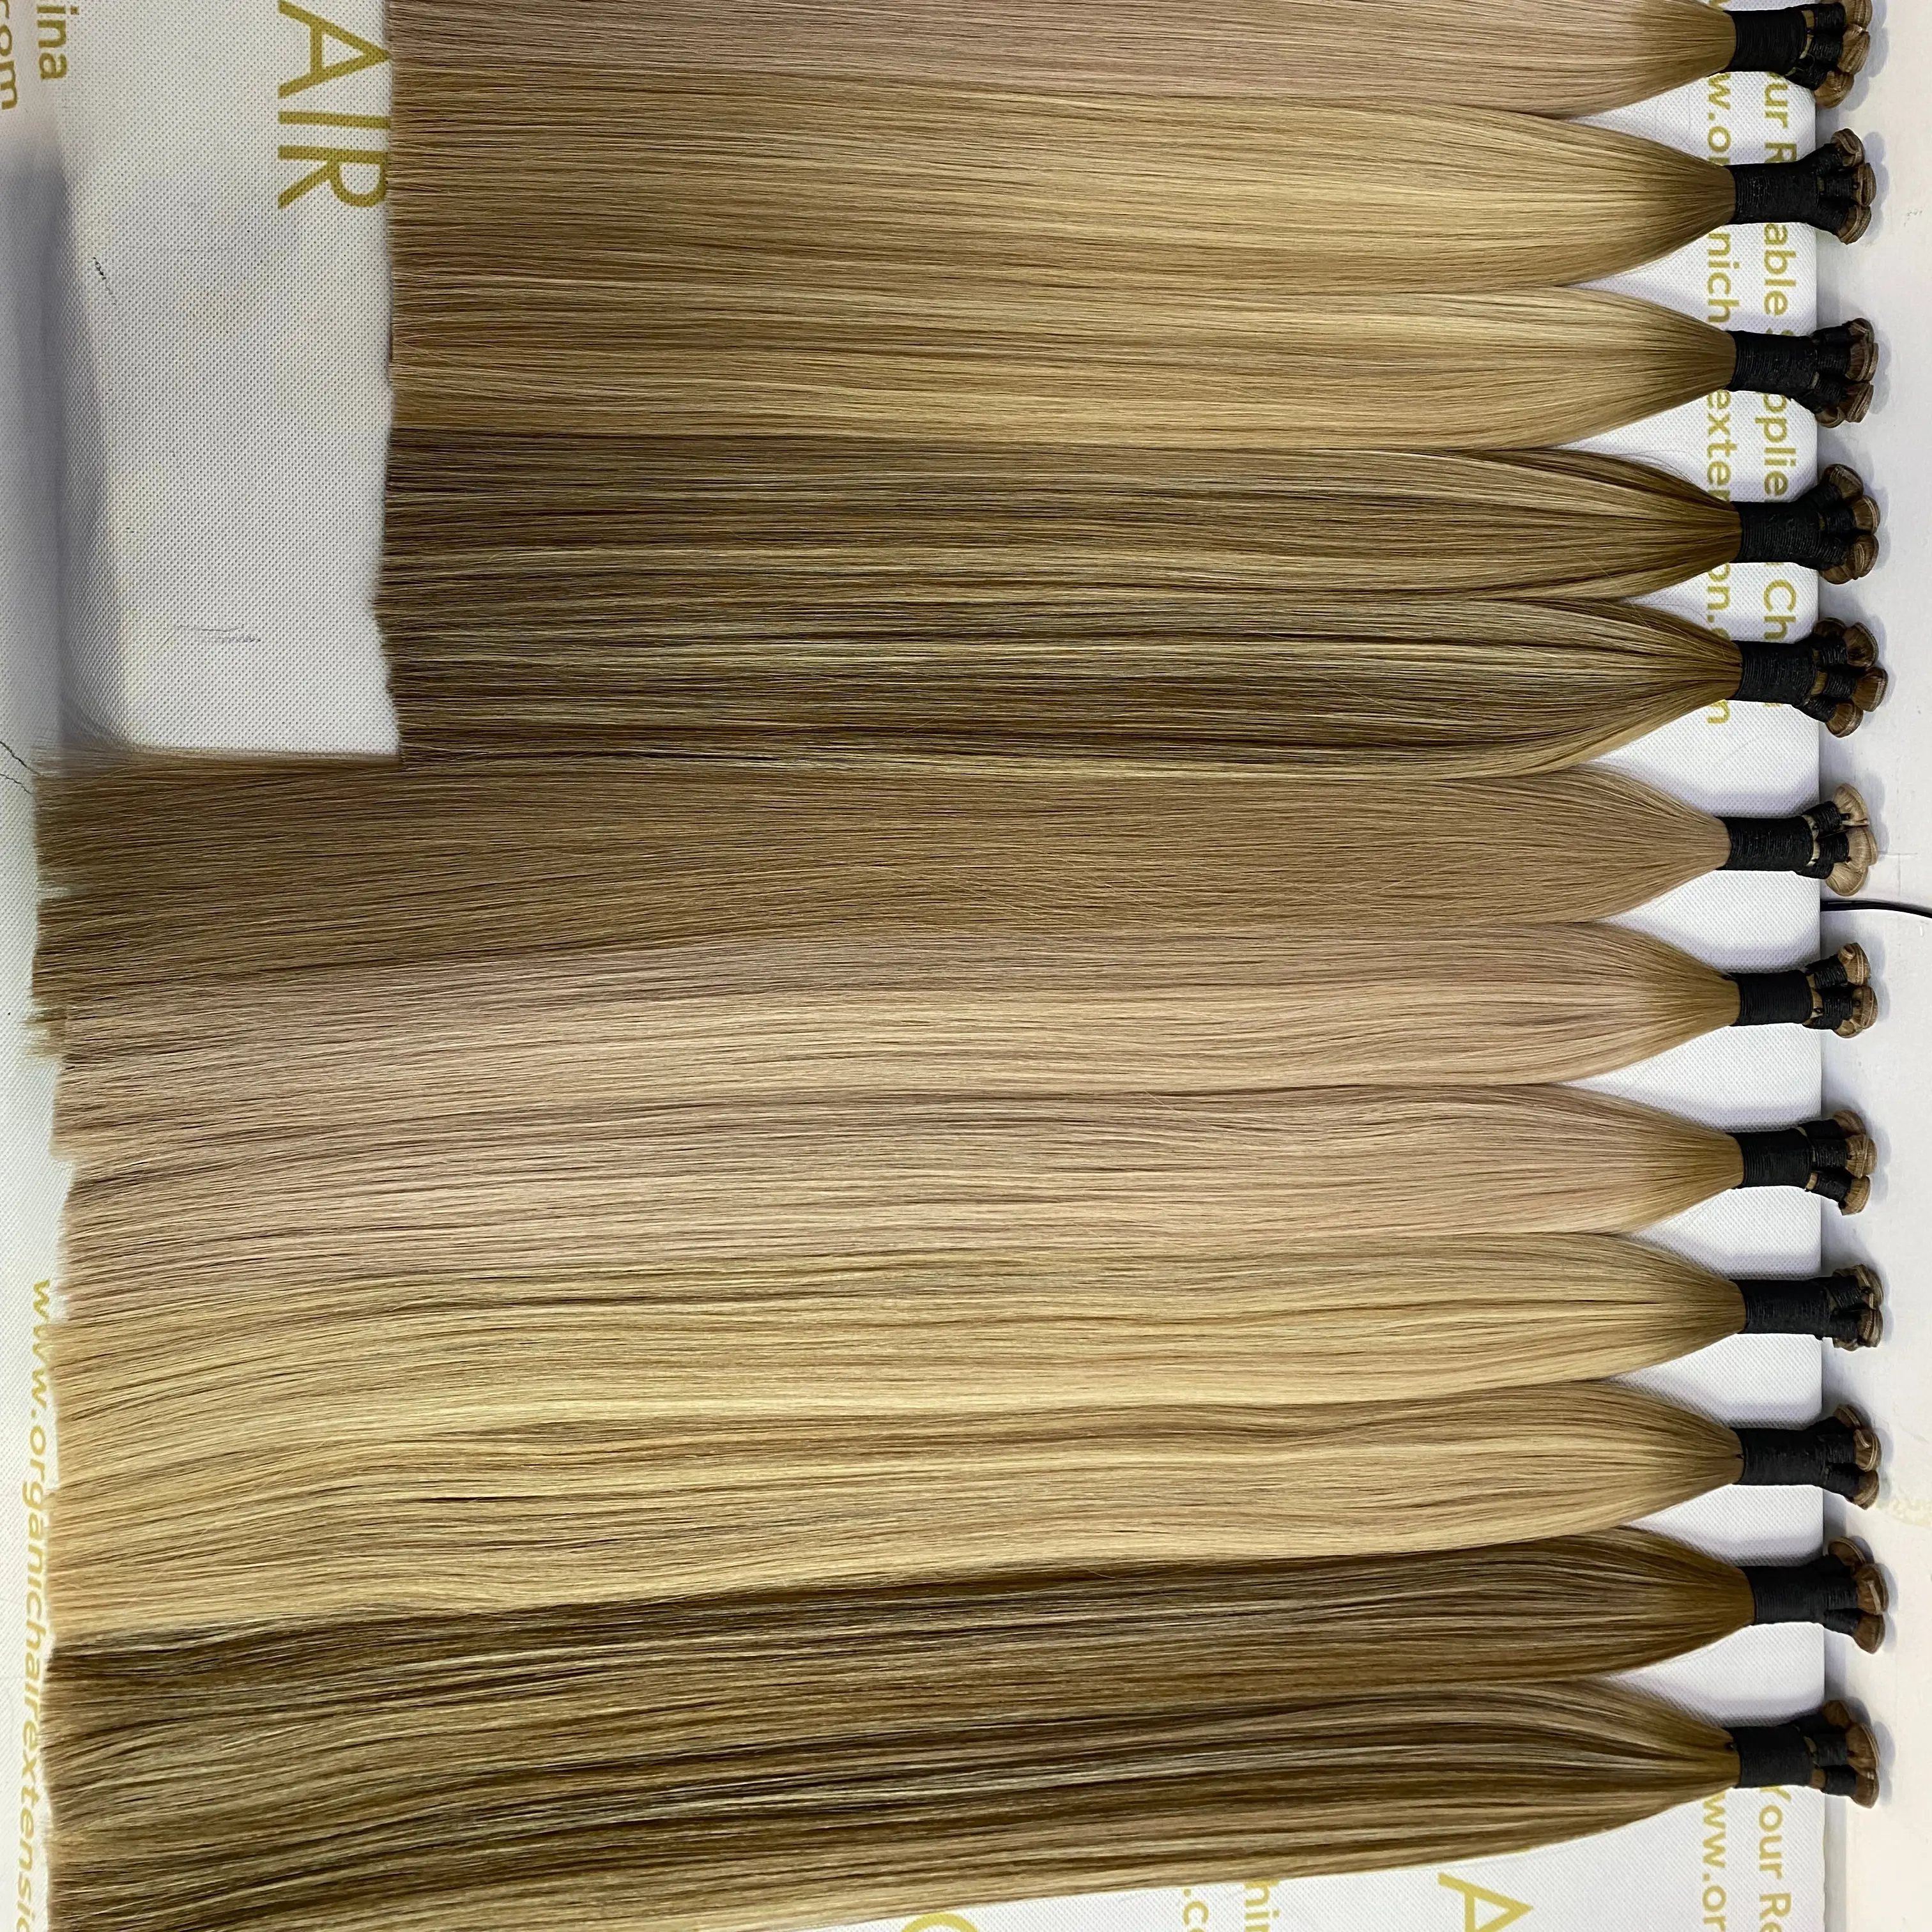 Wholesale cuticle intact remy genius weft hair extensions from China r136